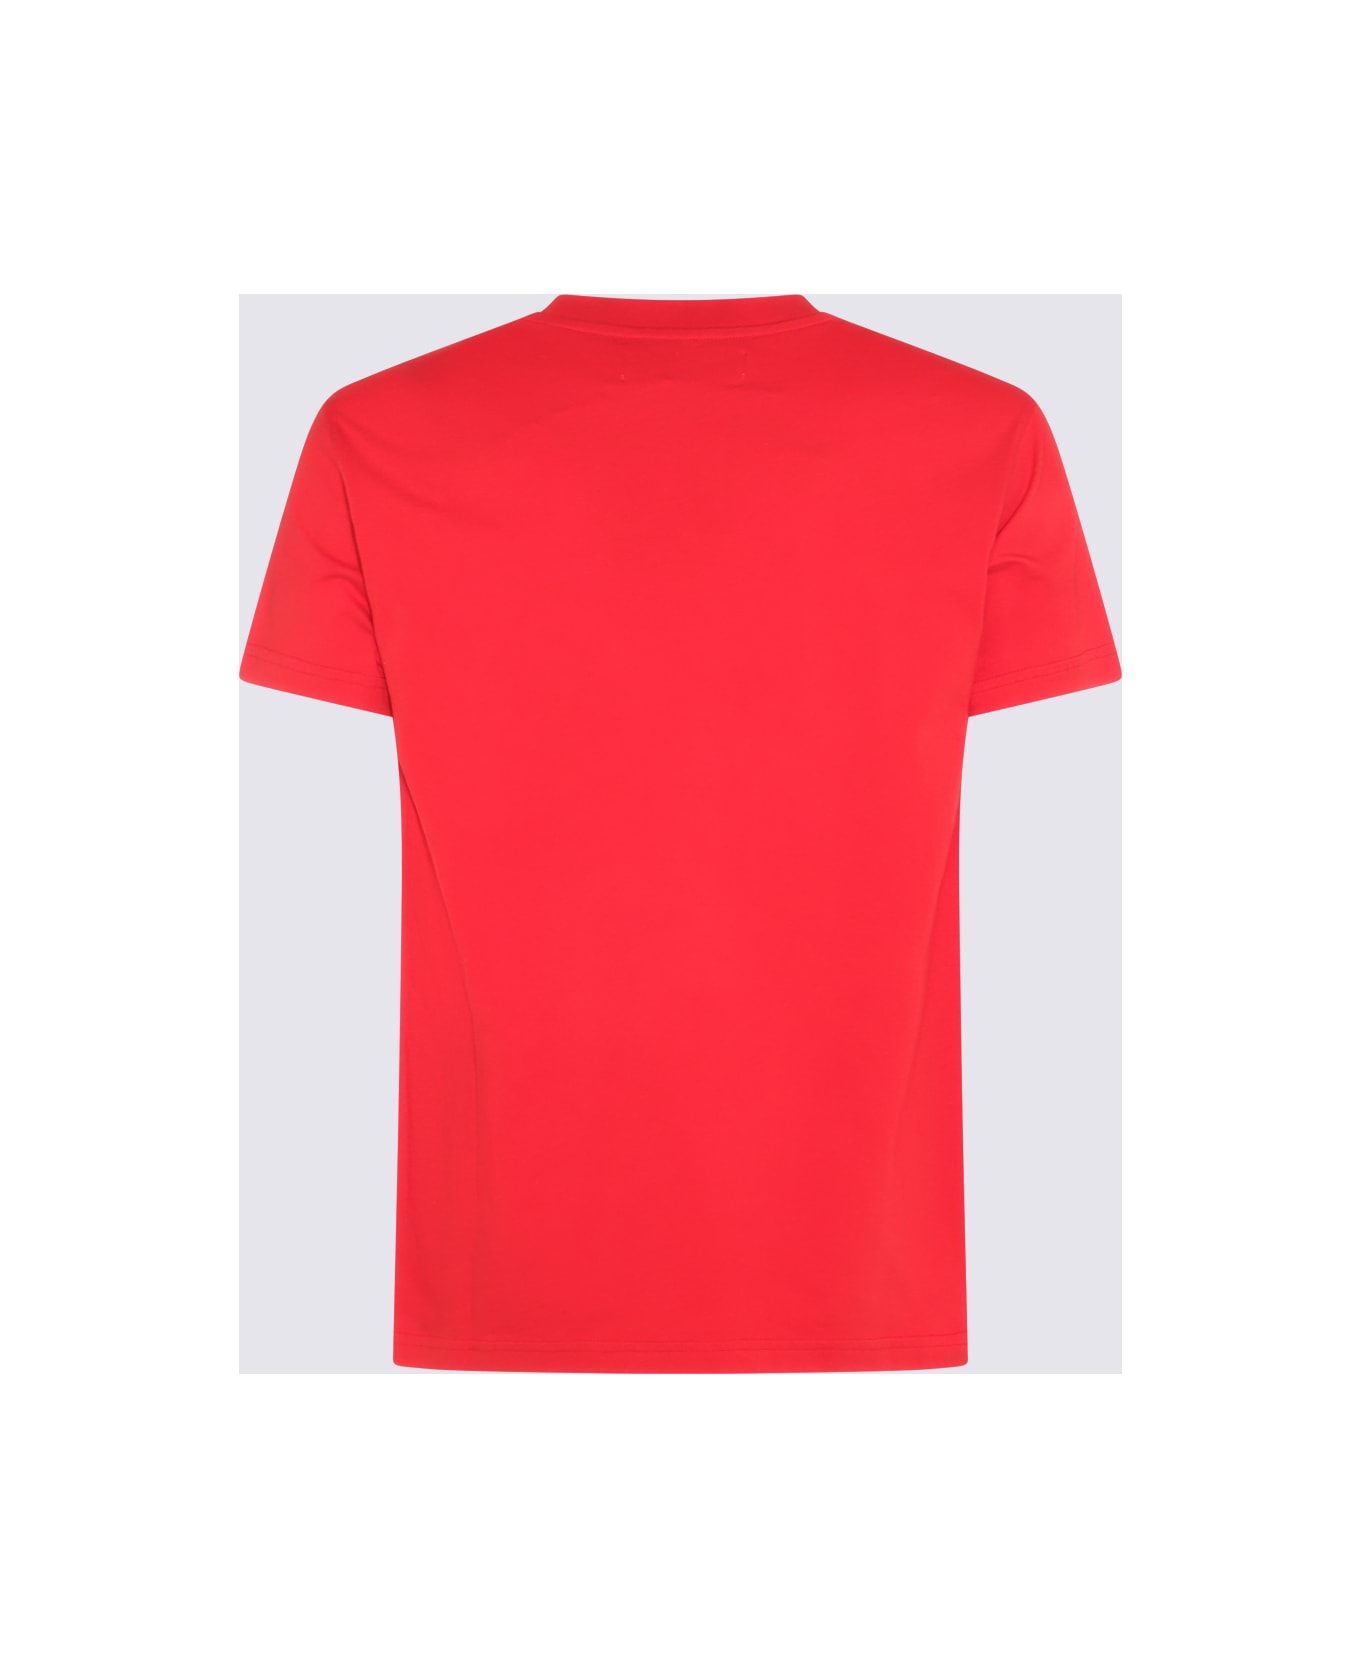 Vivienne Westwood Red Cotton T-shirt - Red